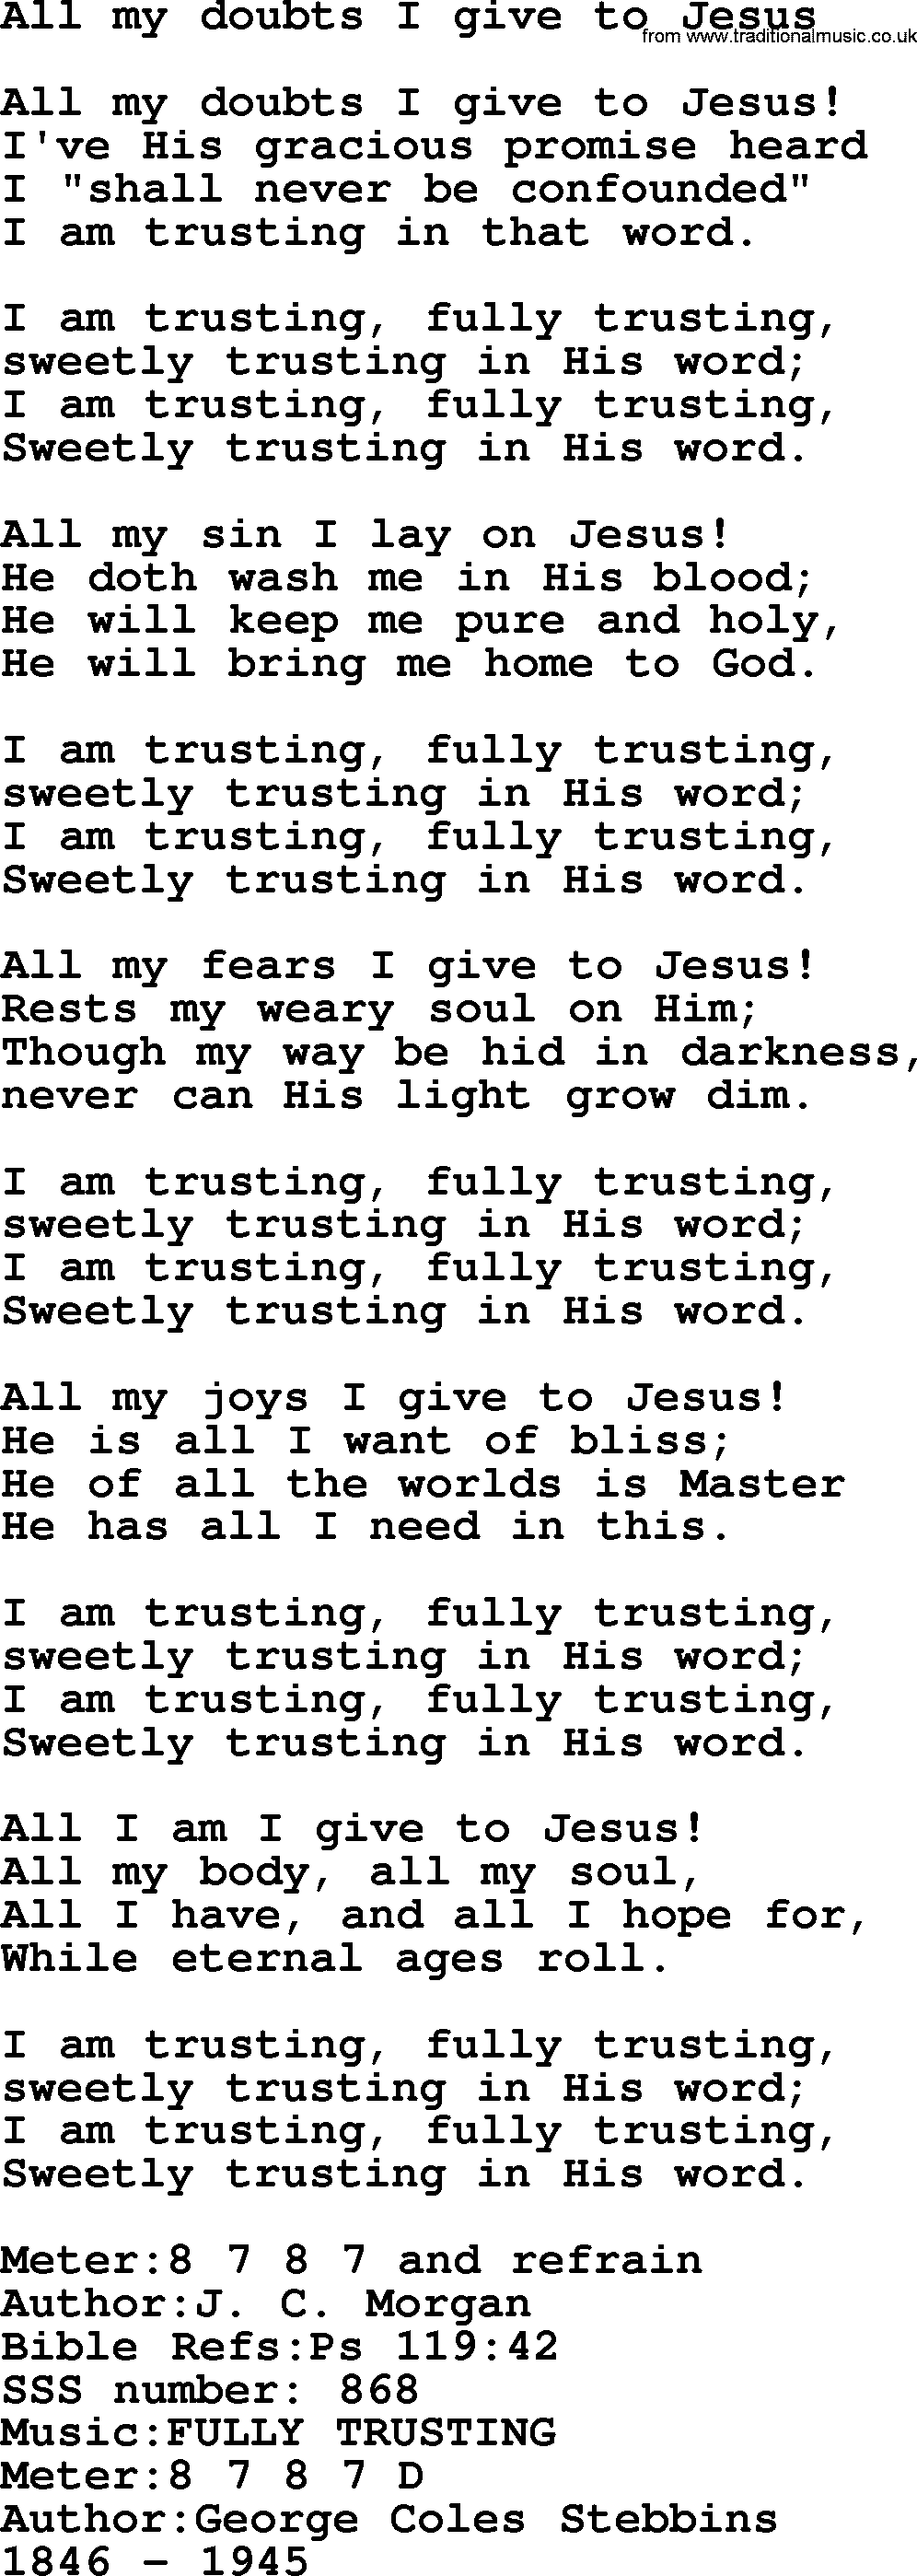 Sacred Songs and Solos complete, 1200 Hymns, title: All My Doubts I Give To Jesus, lyrics and PDF